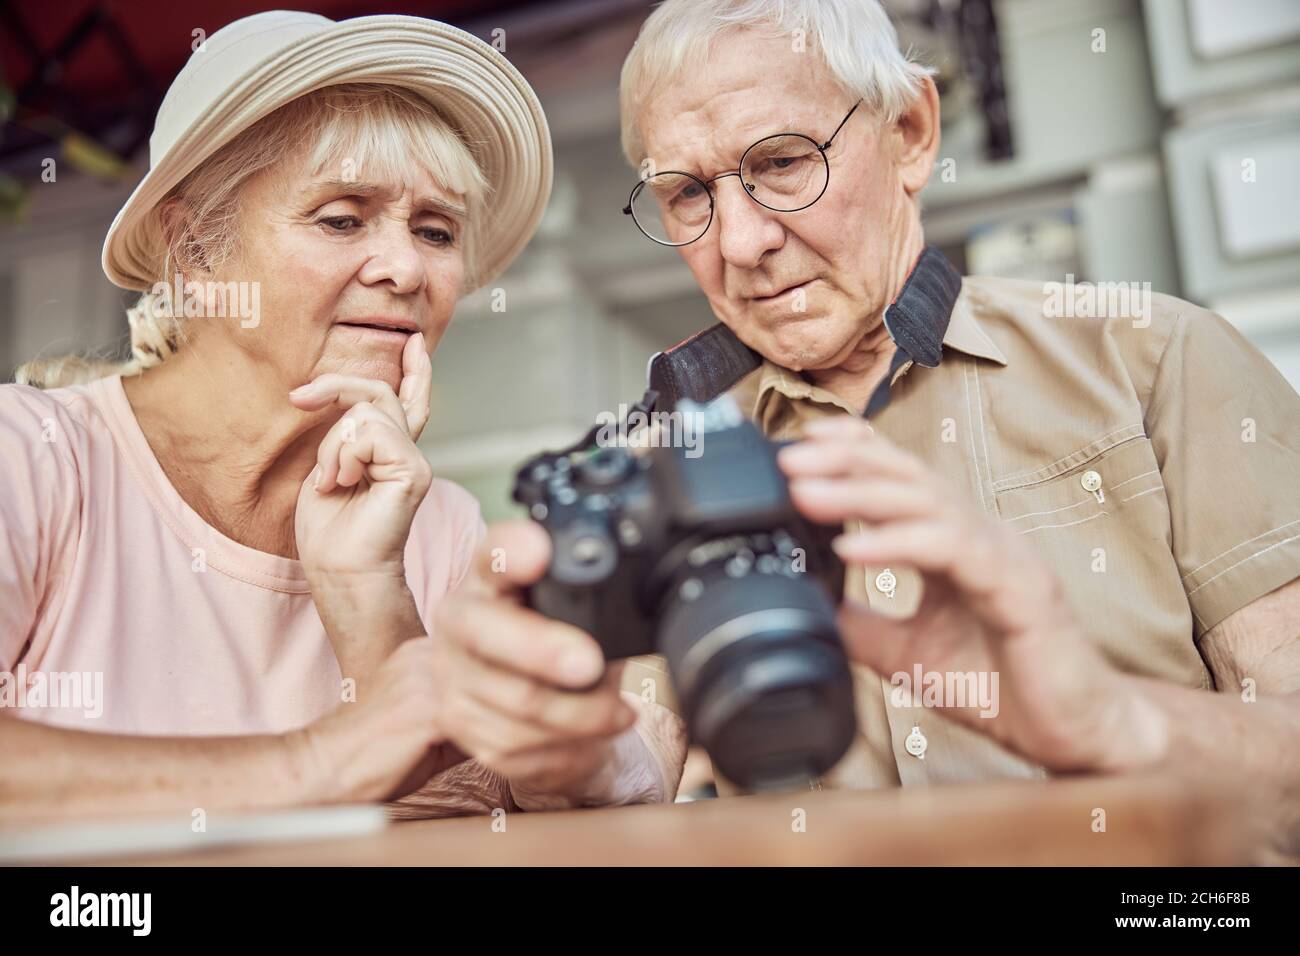 Puzzled aged people staring into the digital camera Stock Photo